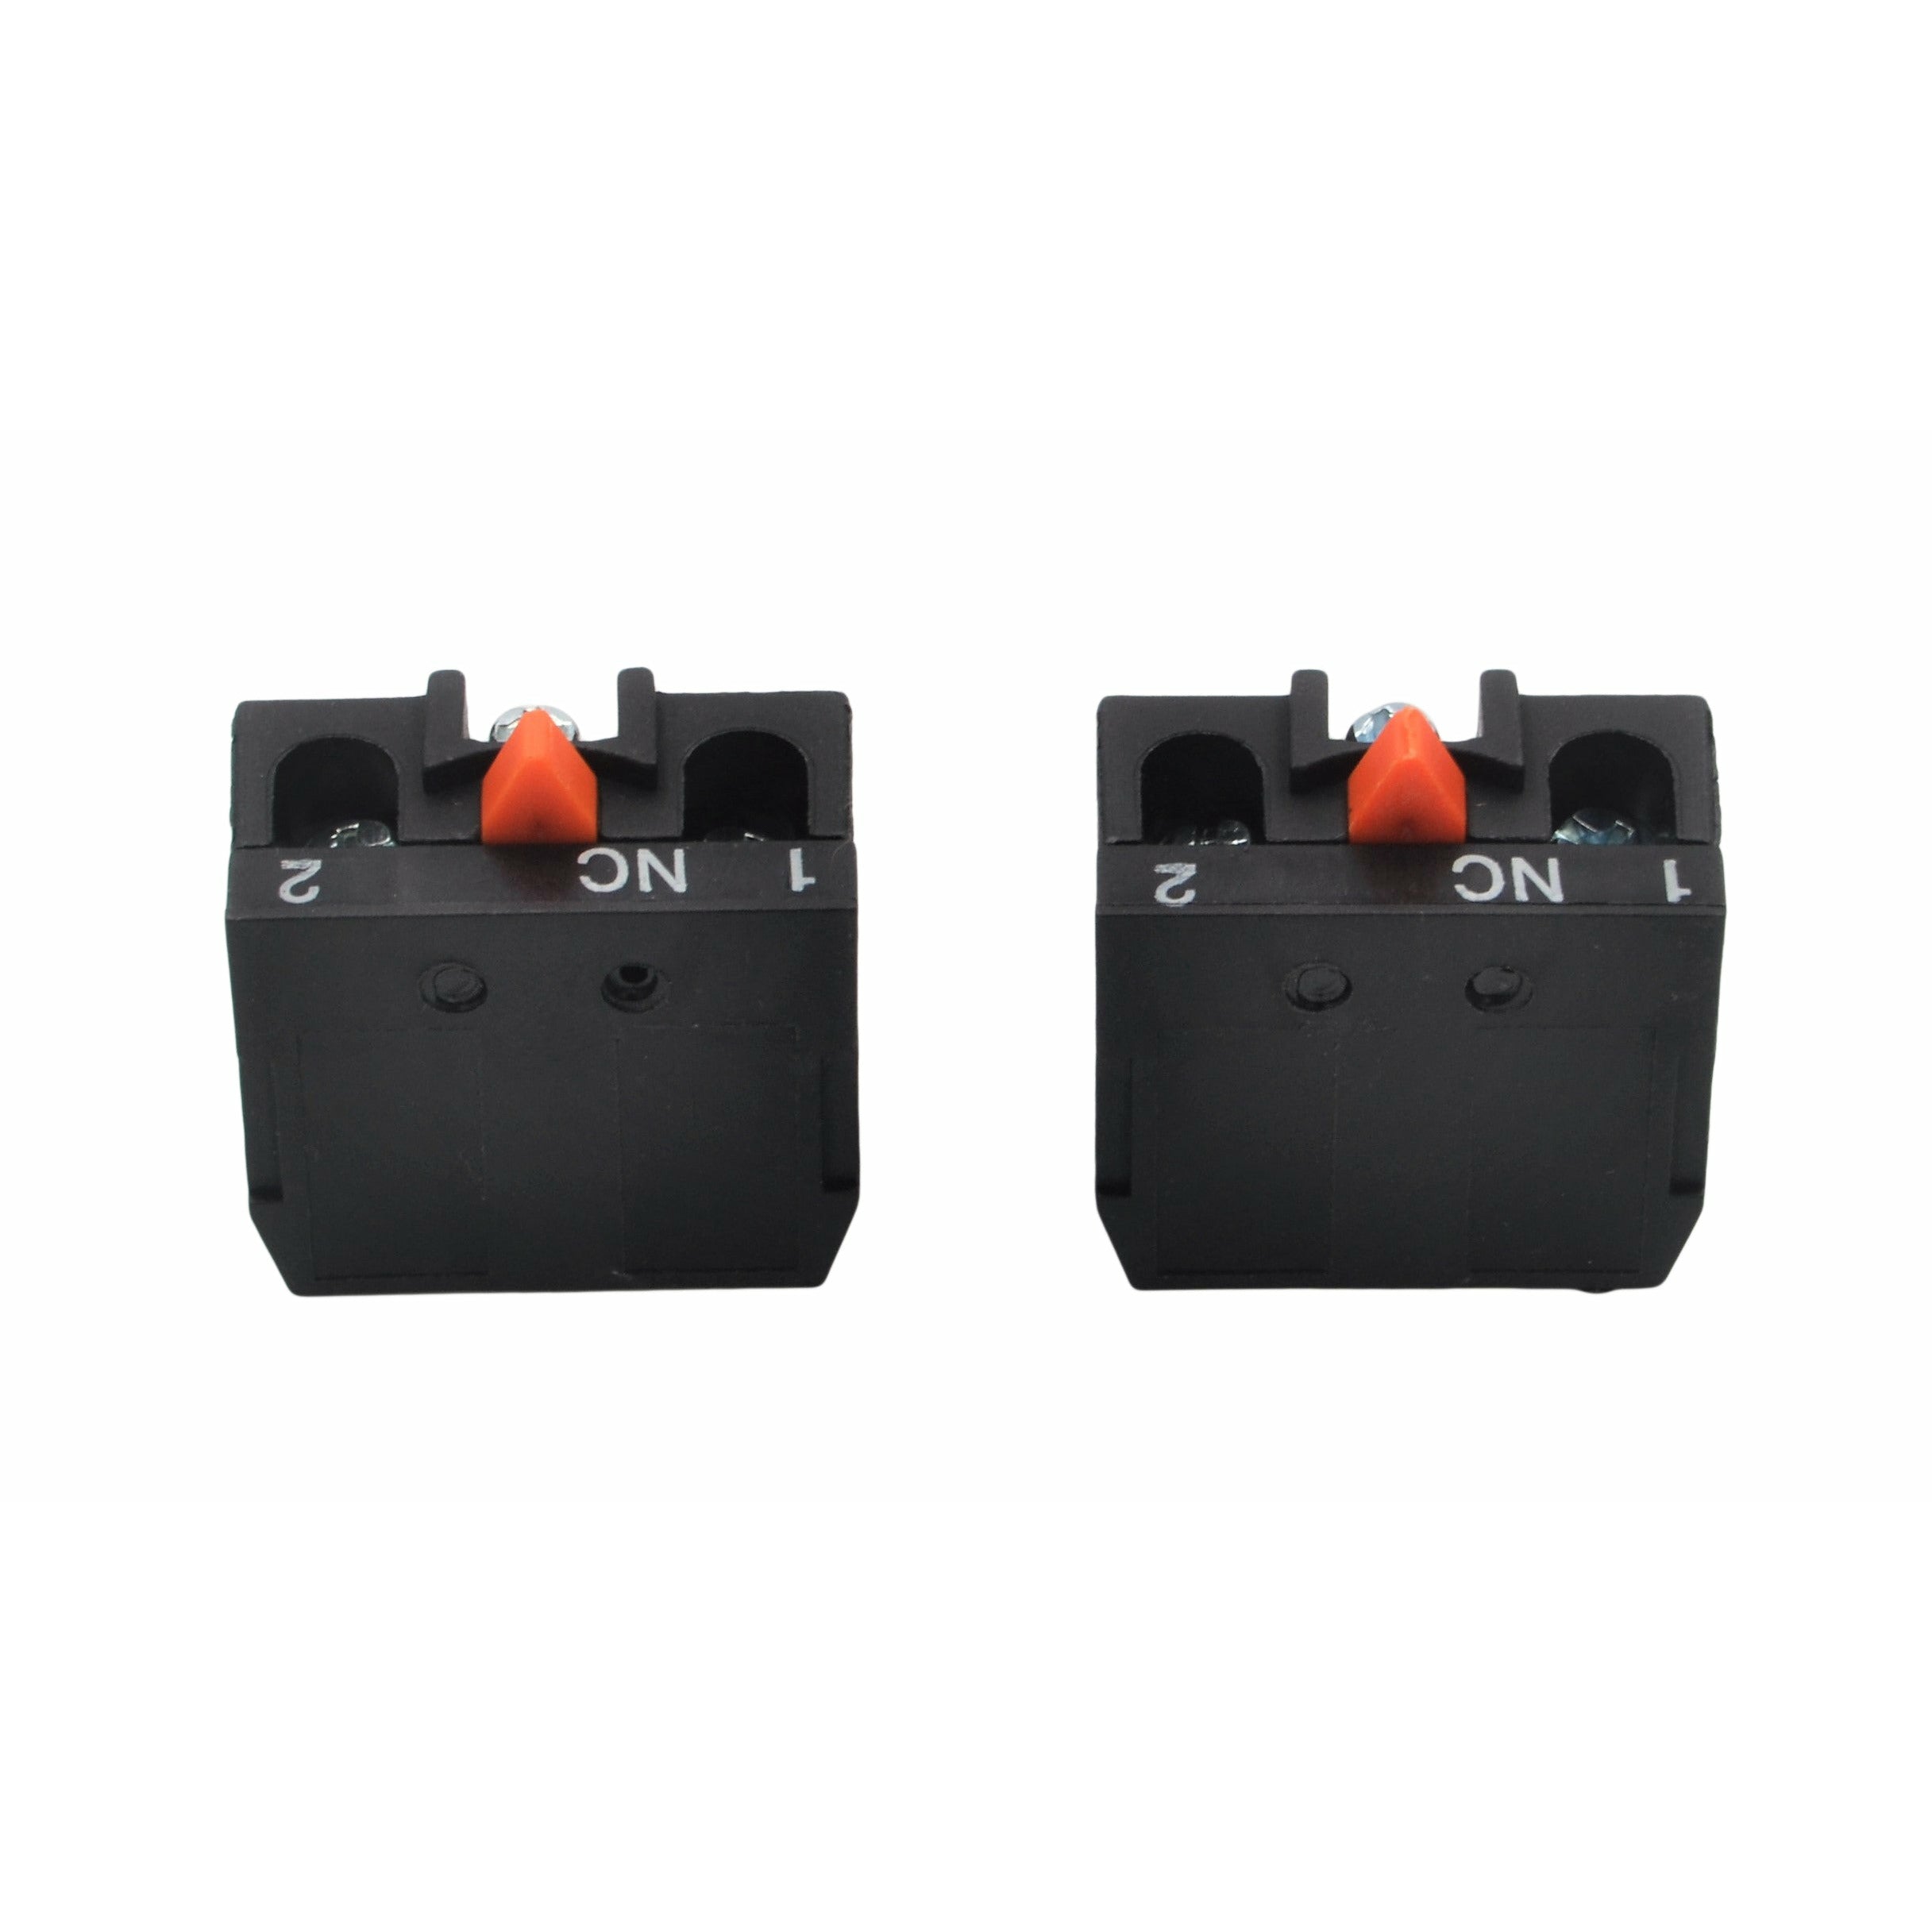  x2 XEN-L1121 Generic Red Plunger NC Contact Block Switch